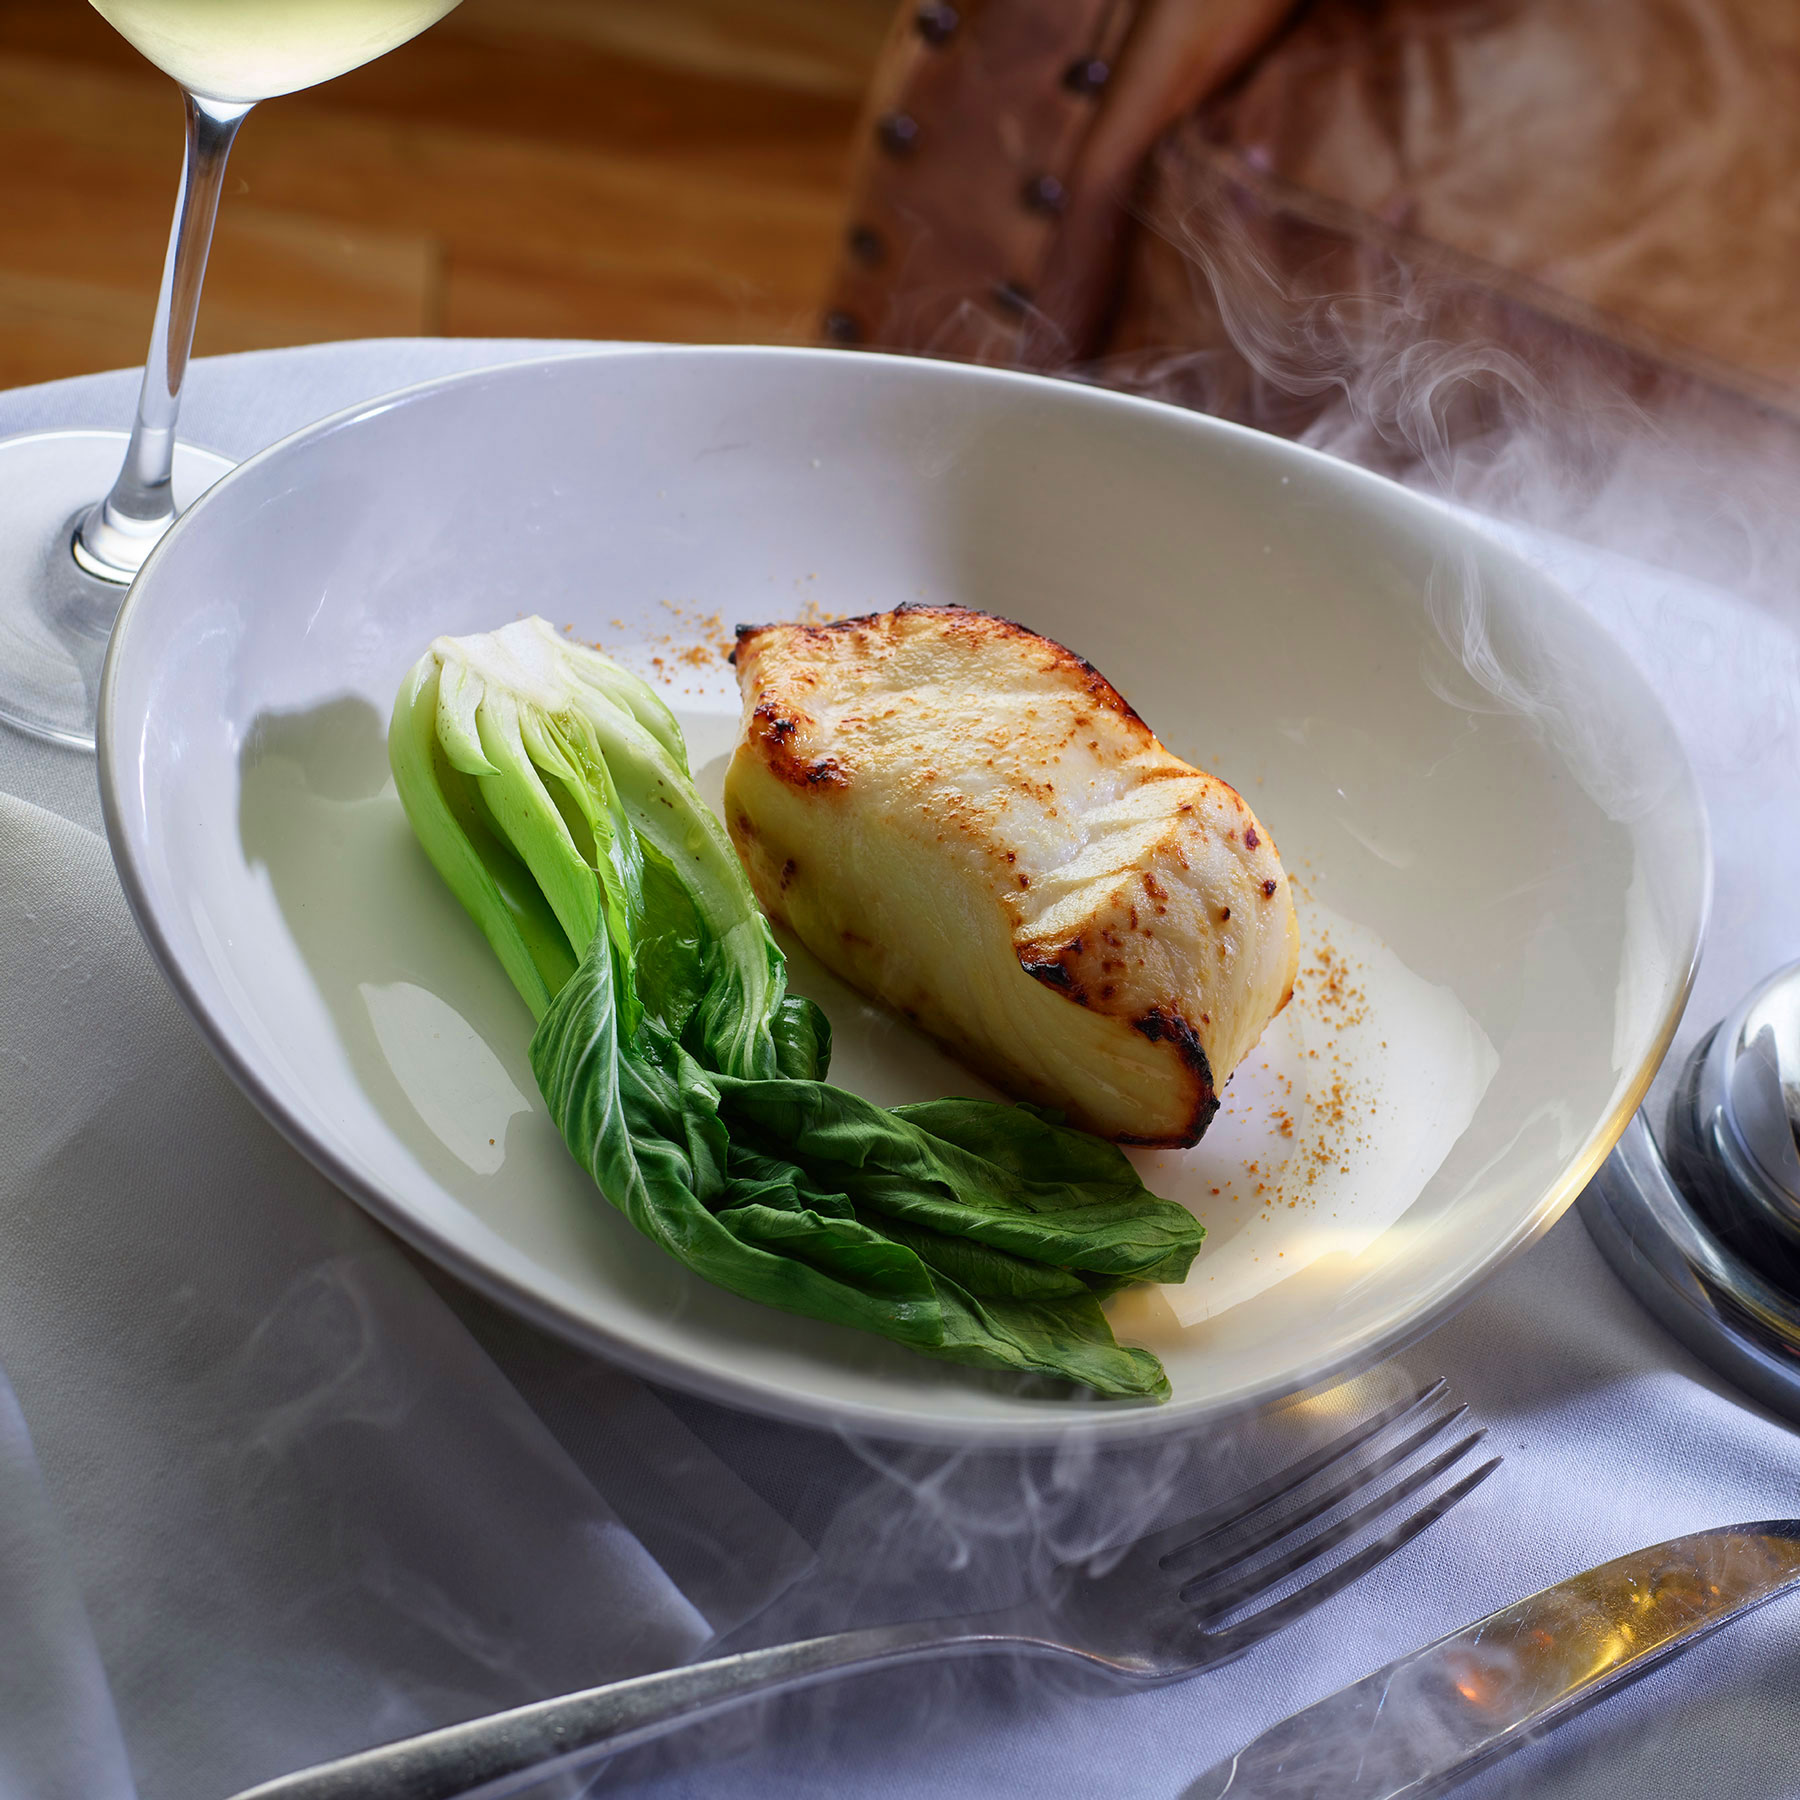 Steaming grilled black cod plated with leafy greens